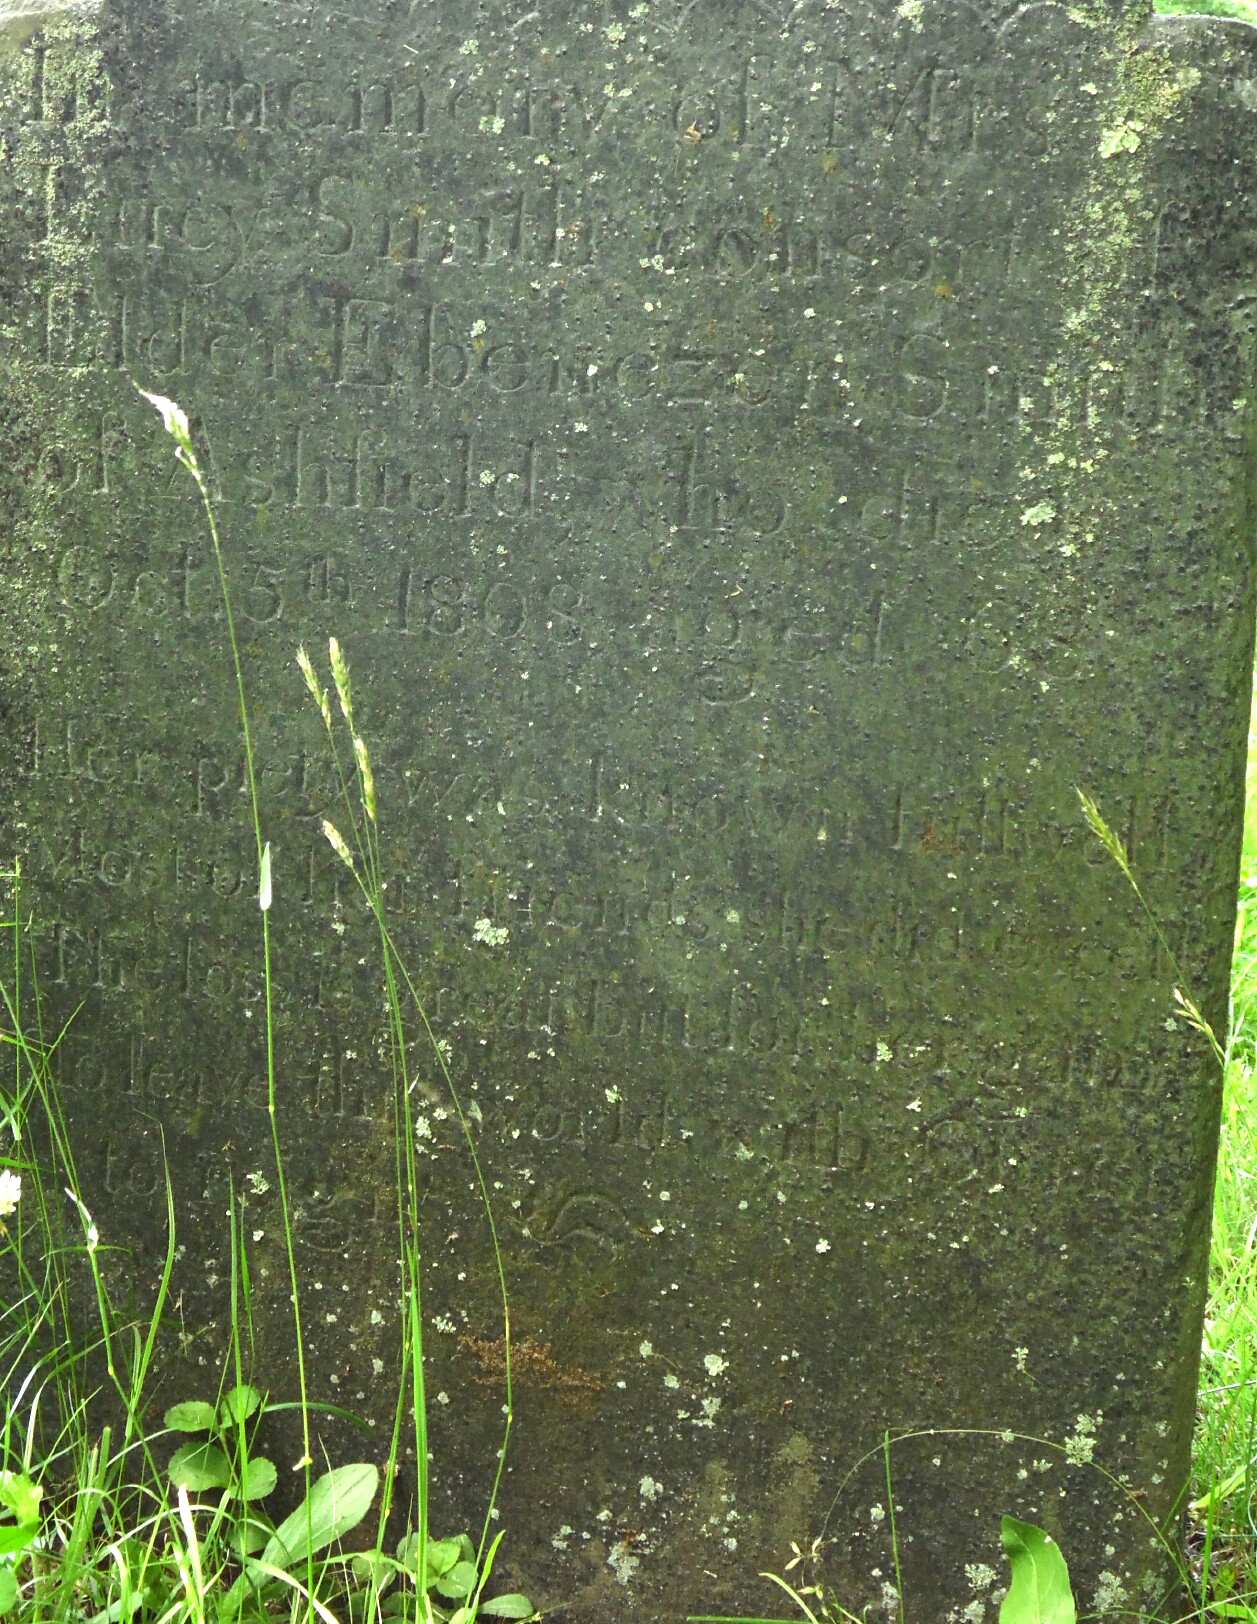 Close-up of Lucy (Shepardson) Smith's gravestone